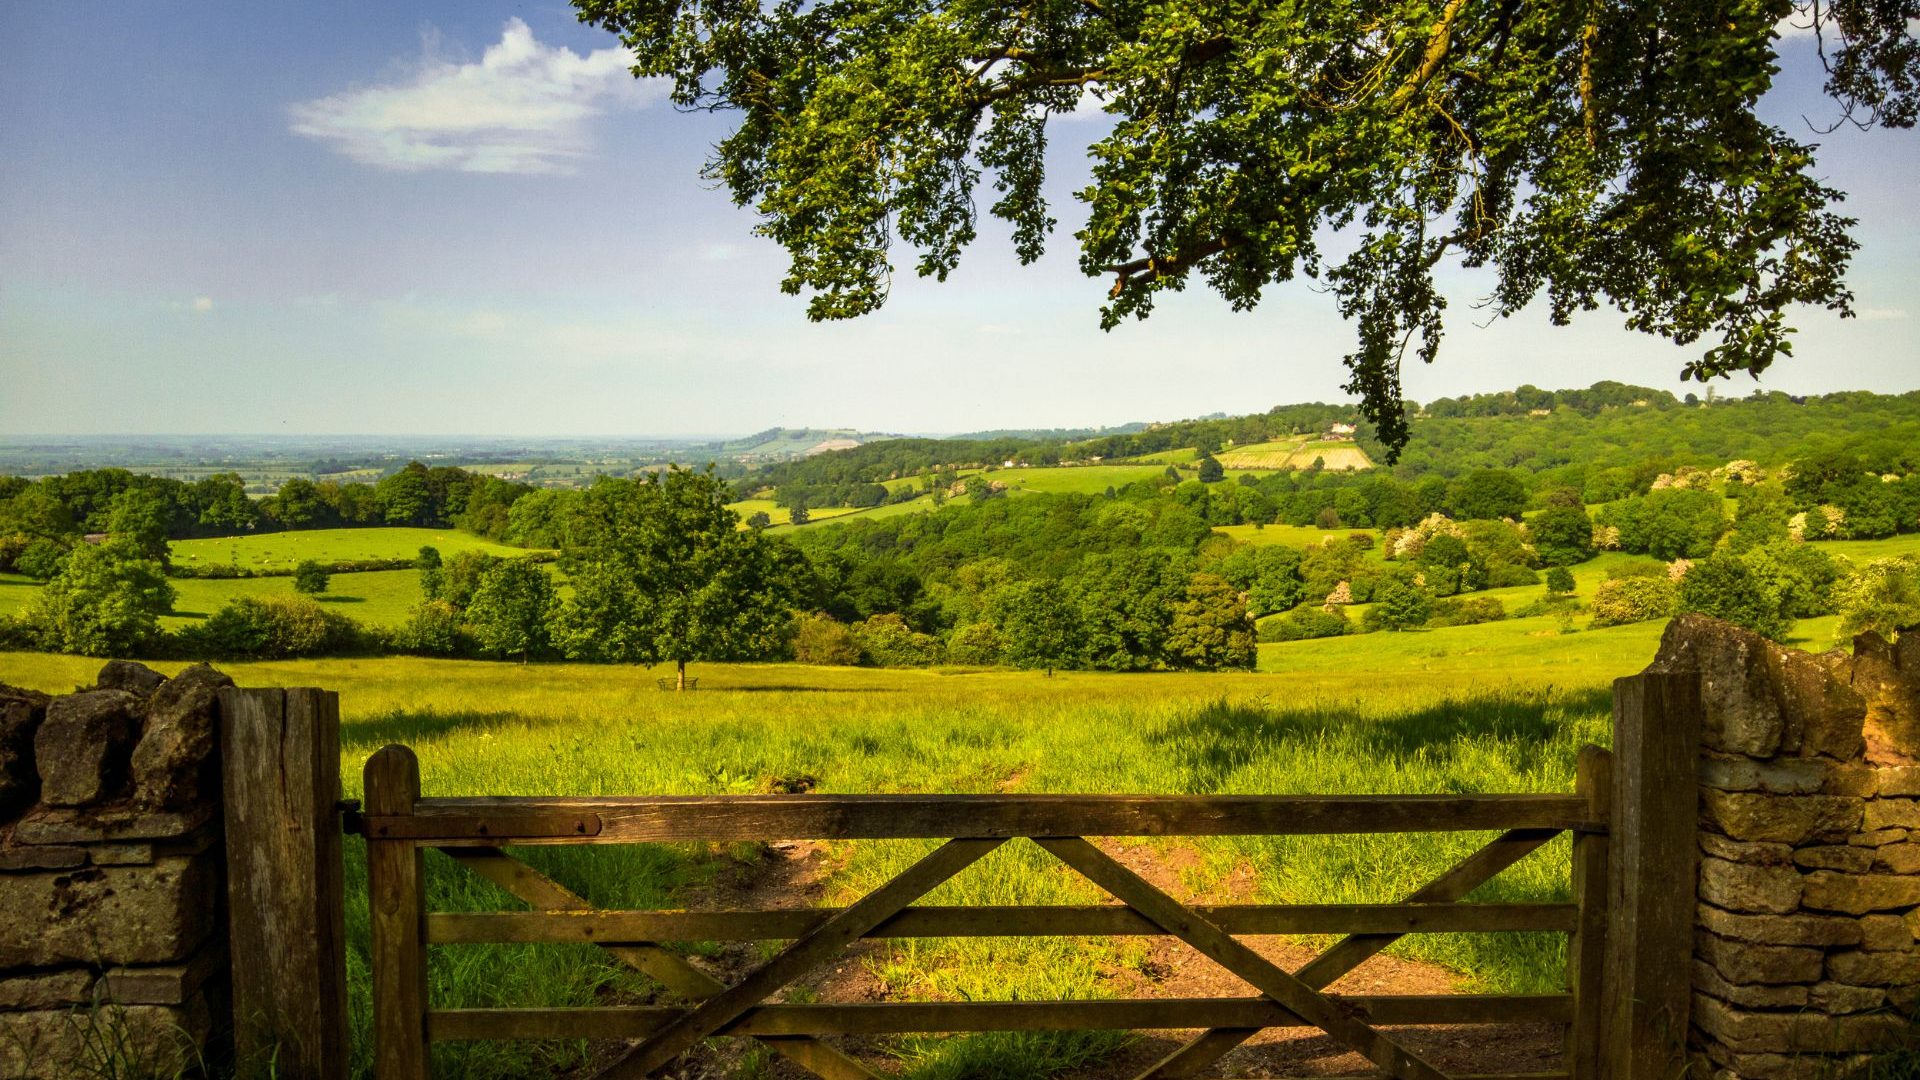 View across a fence into a green field in the Cotswolds